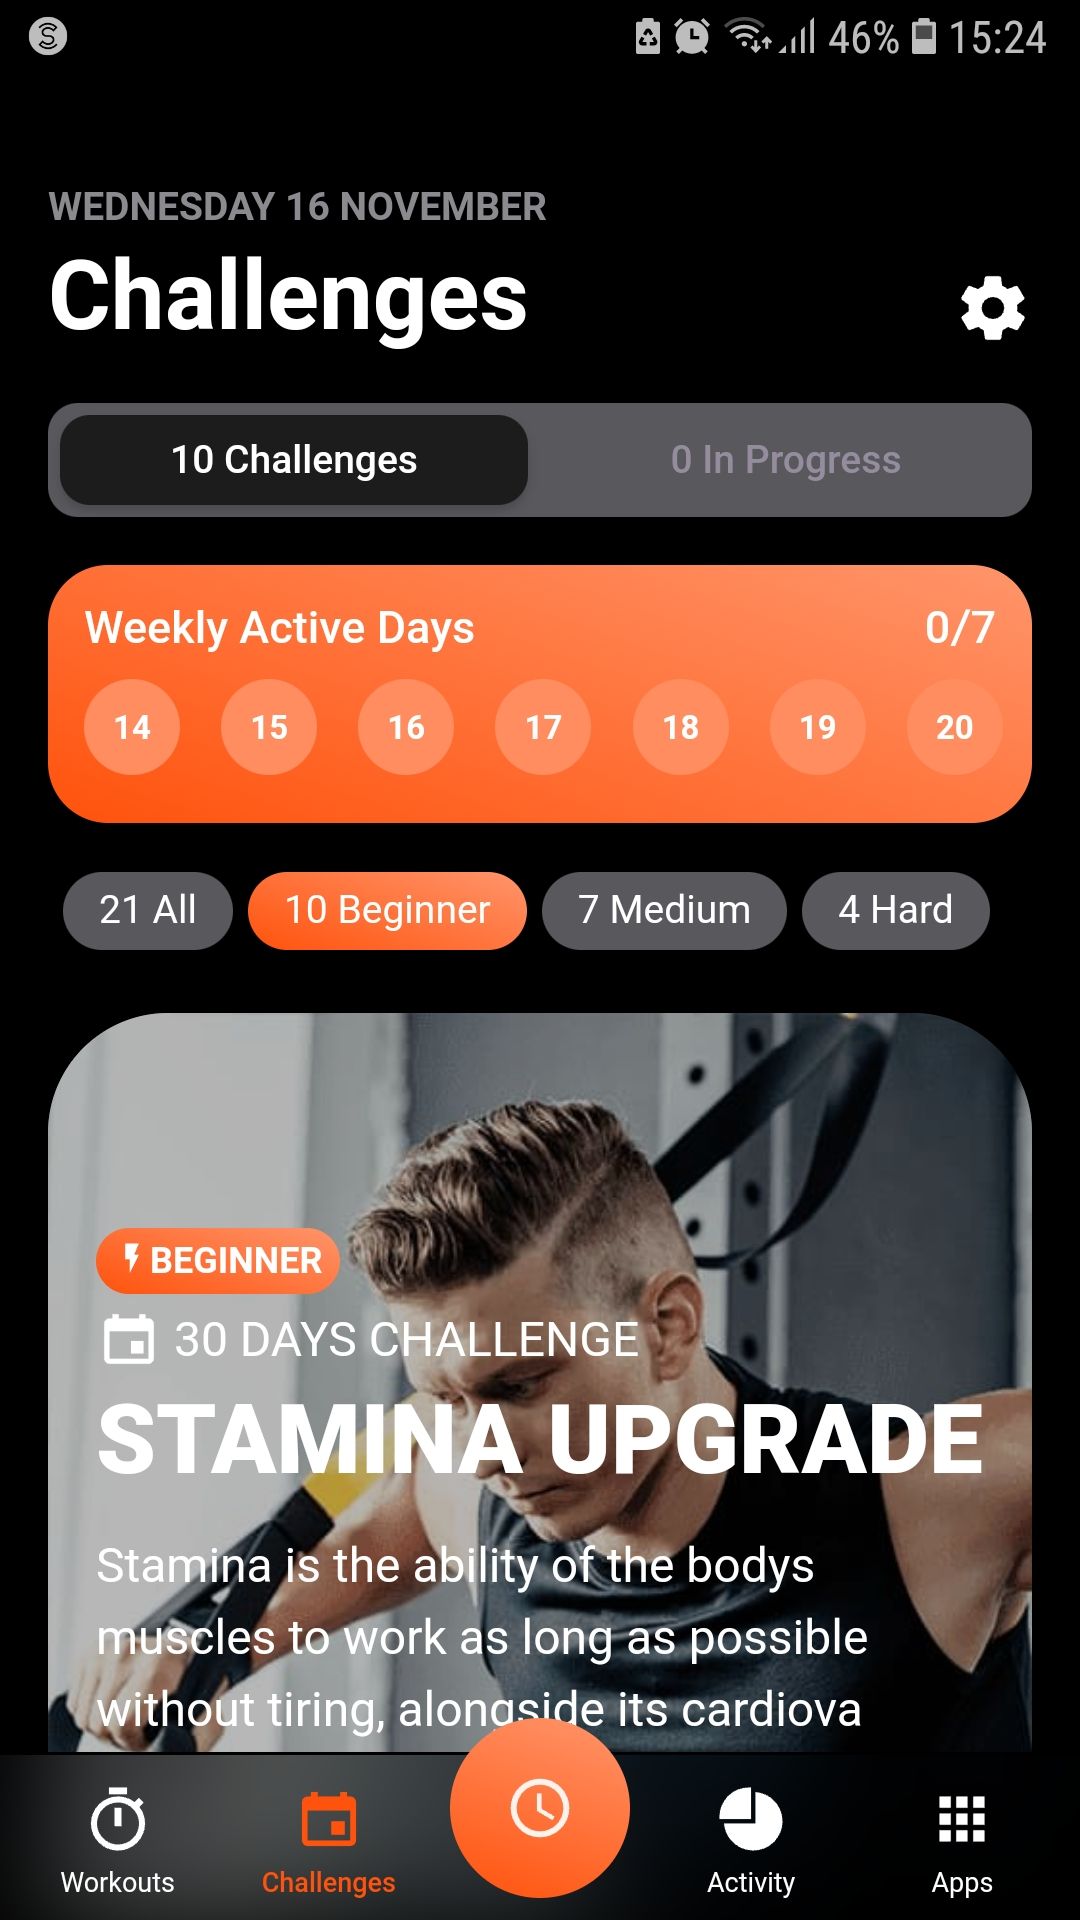 Resistance Band Training mobile workout app challenges